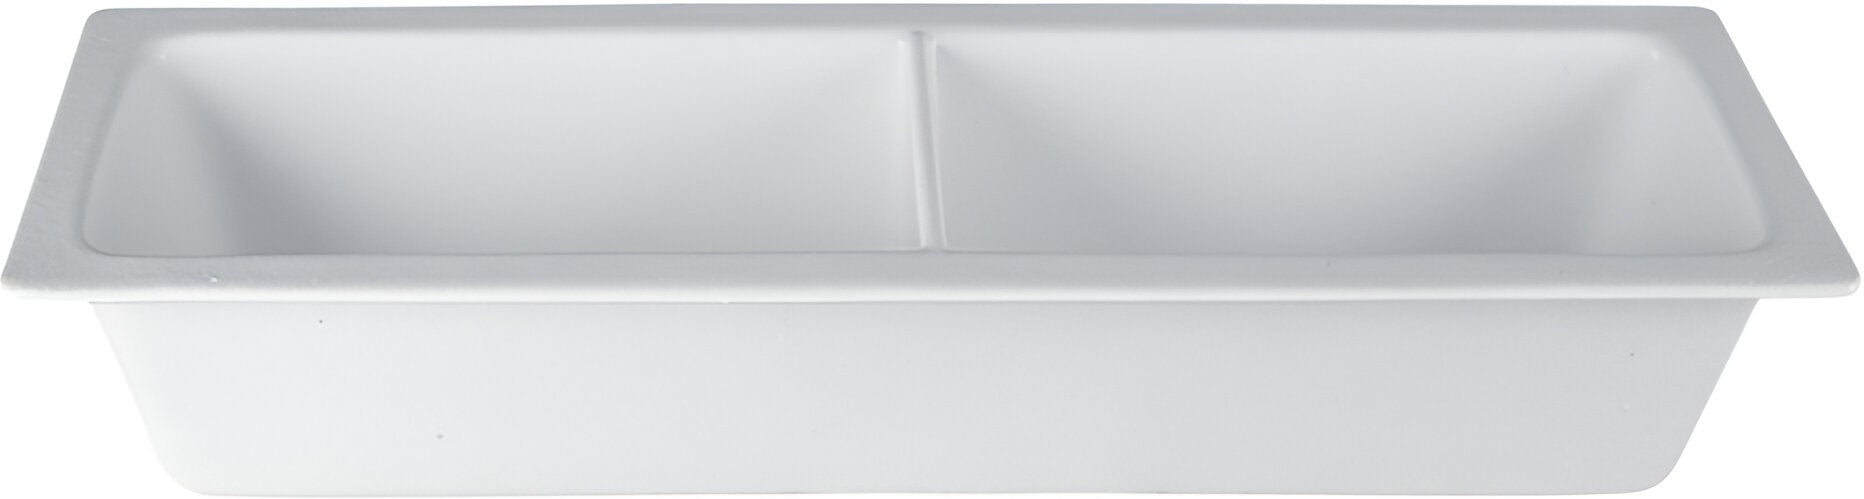 Bugambilia - Classic 3 Qt White Rectangular Half Size Long Deep Food Pan With Horizontal Divider With Elegantly Textured - IH2/41WW